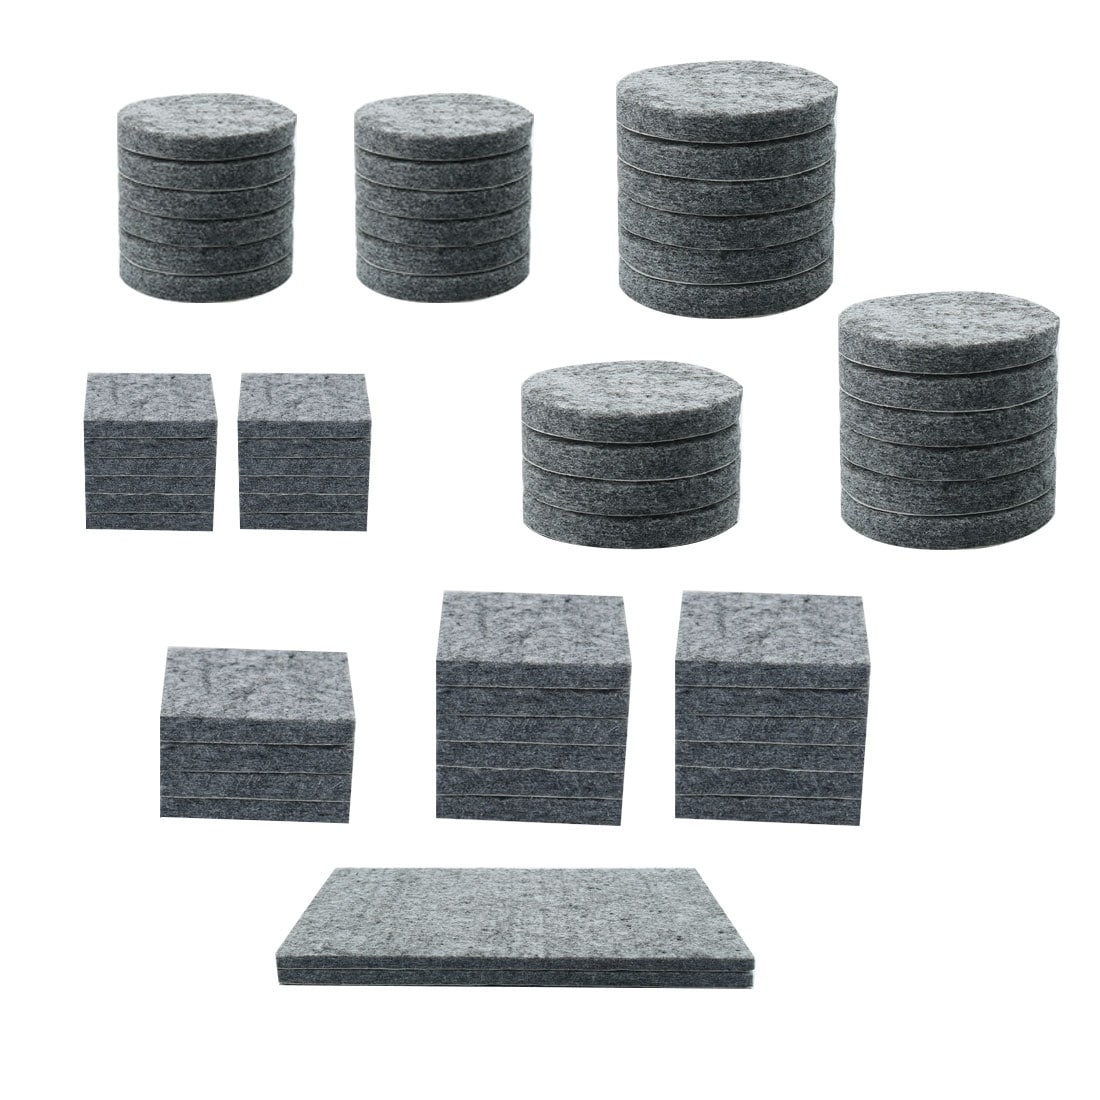 Grey Furniture Pads,50 Pieces 5mm Thick Felt Pads Self Adhesive Round Furniture Feet Protectors for Floor and Furniture 